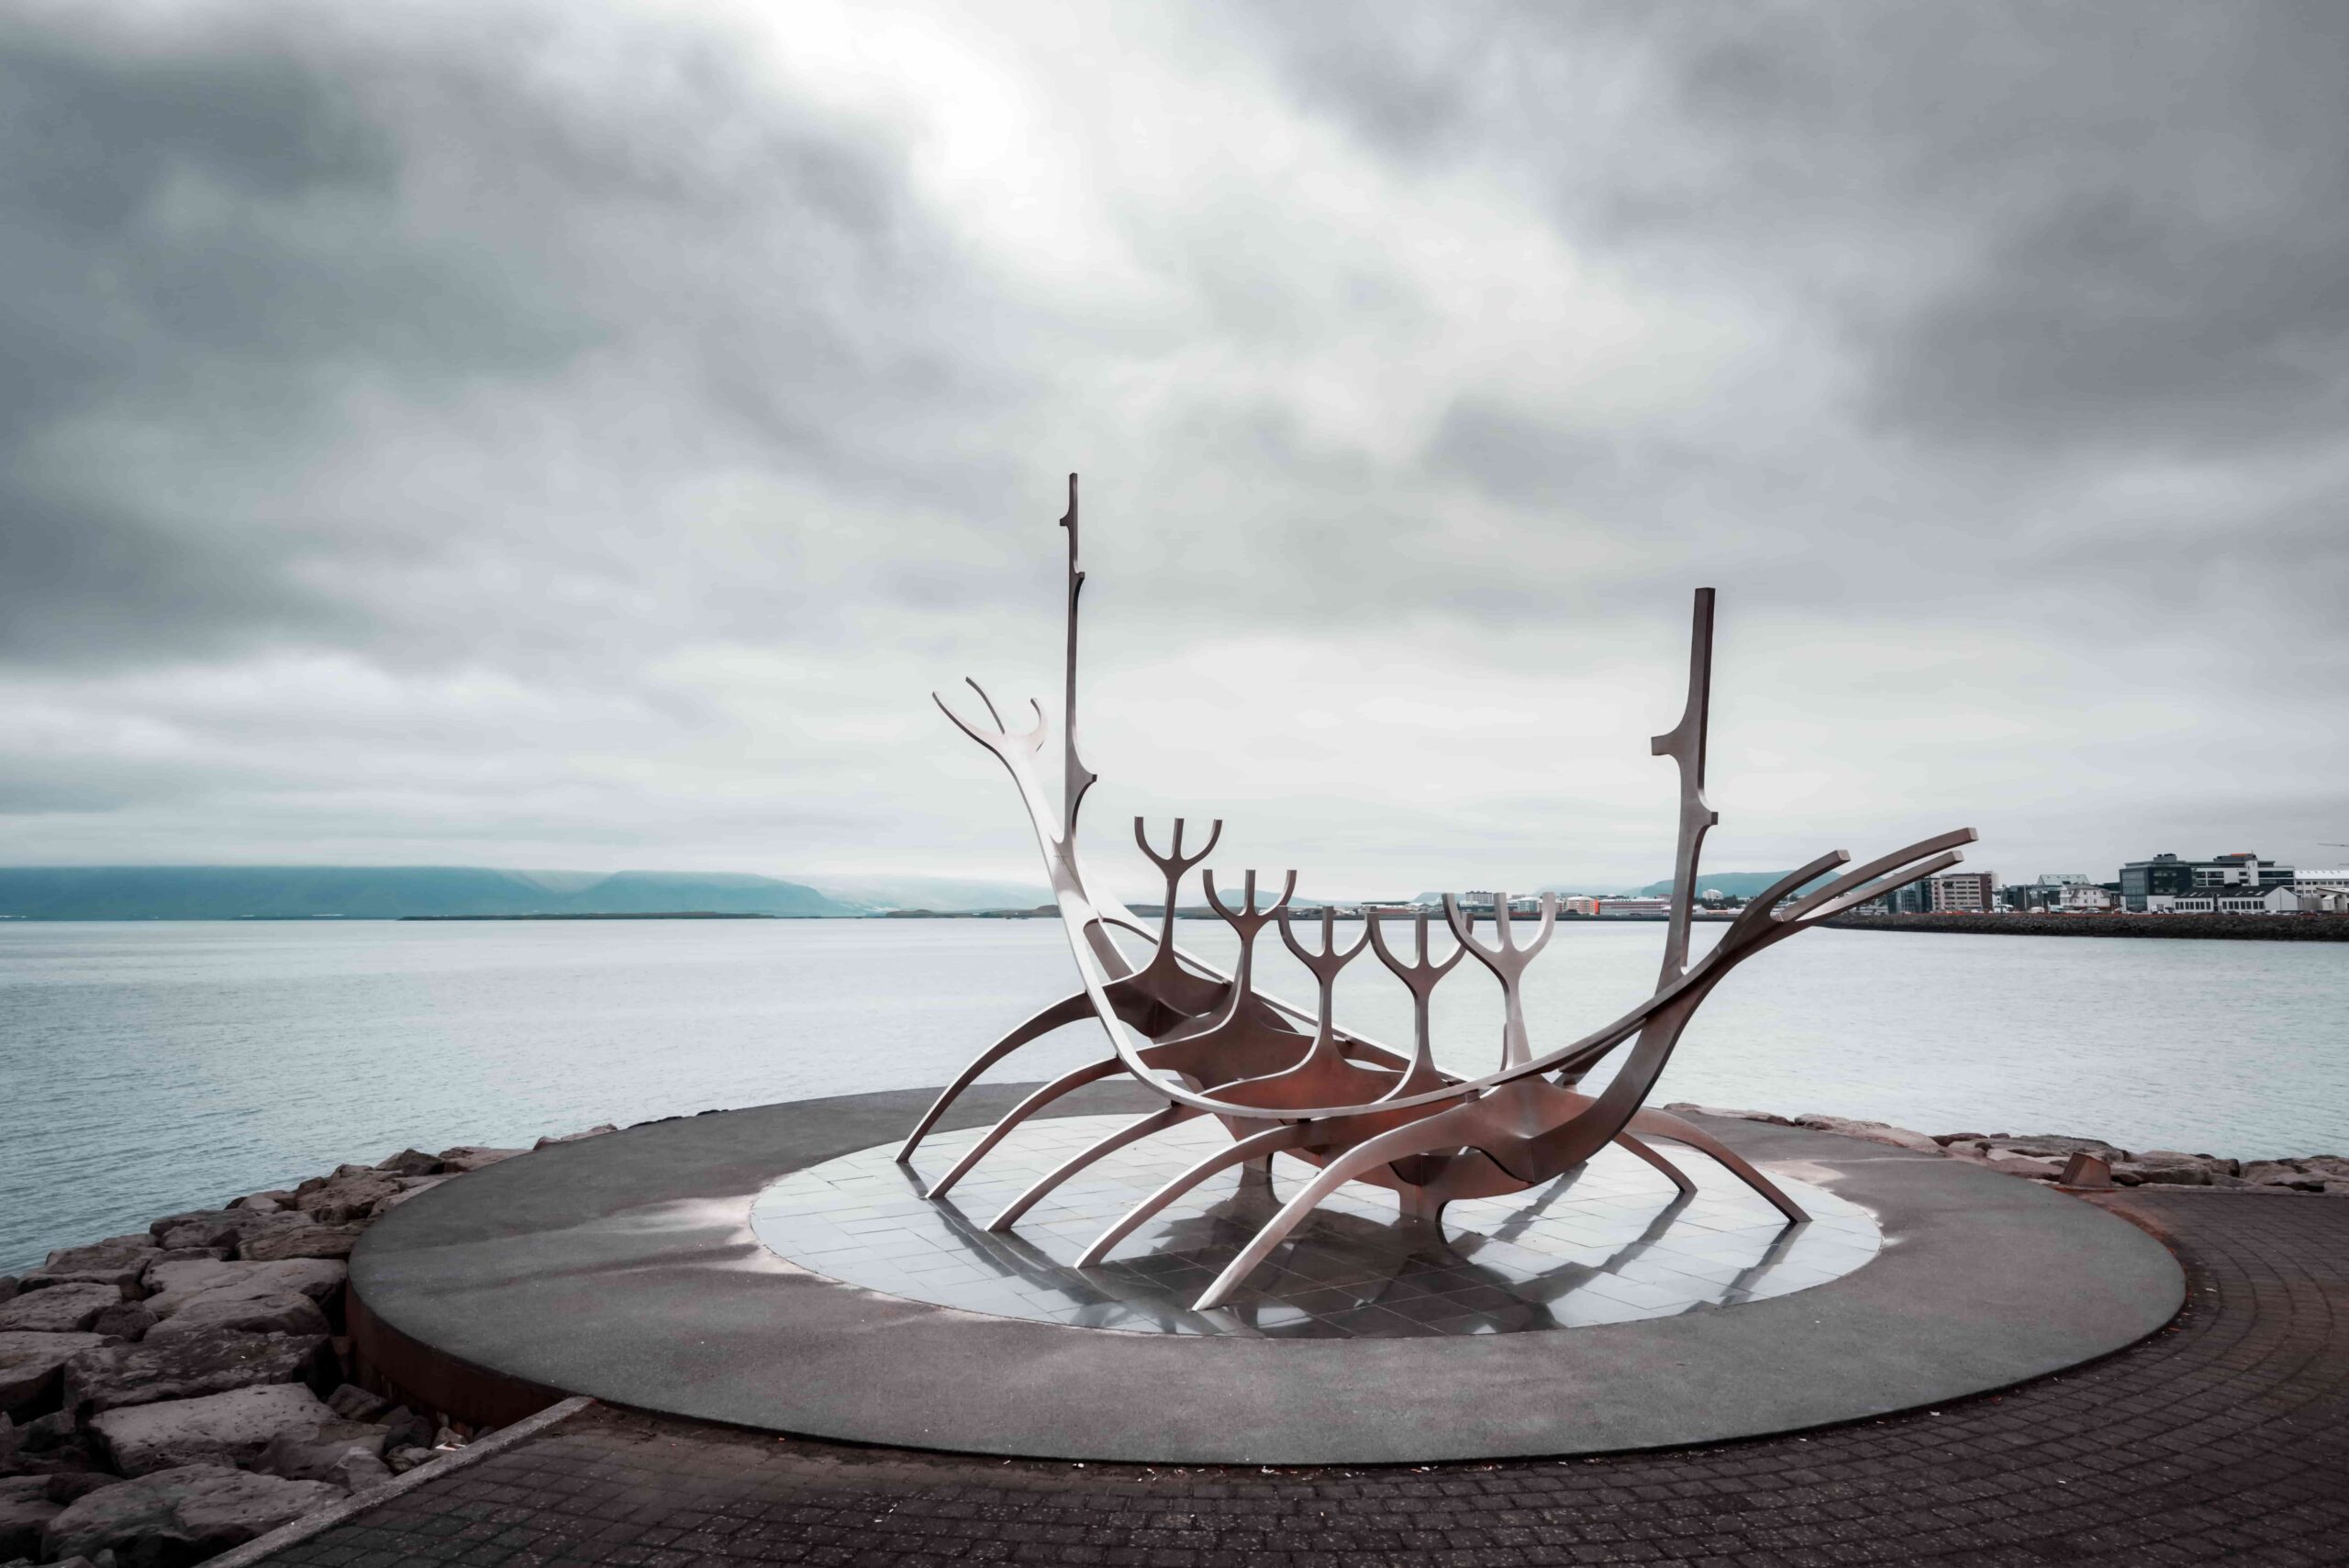 A picture of the Sun Voyager by Reykjavik´s coastline.